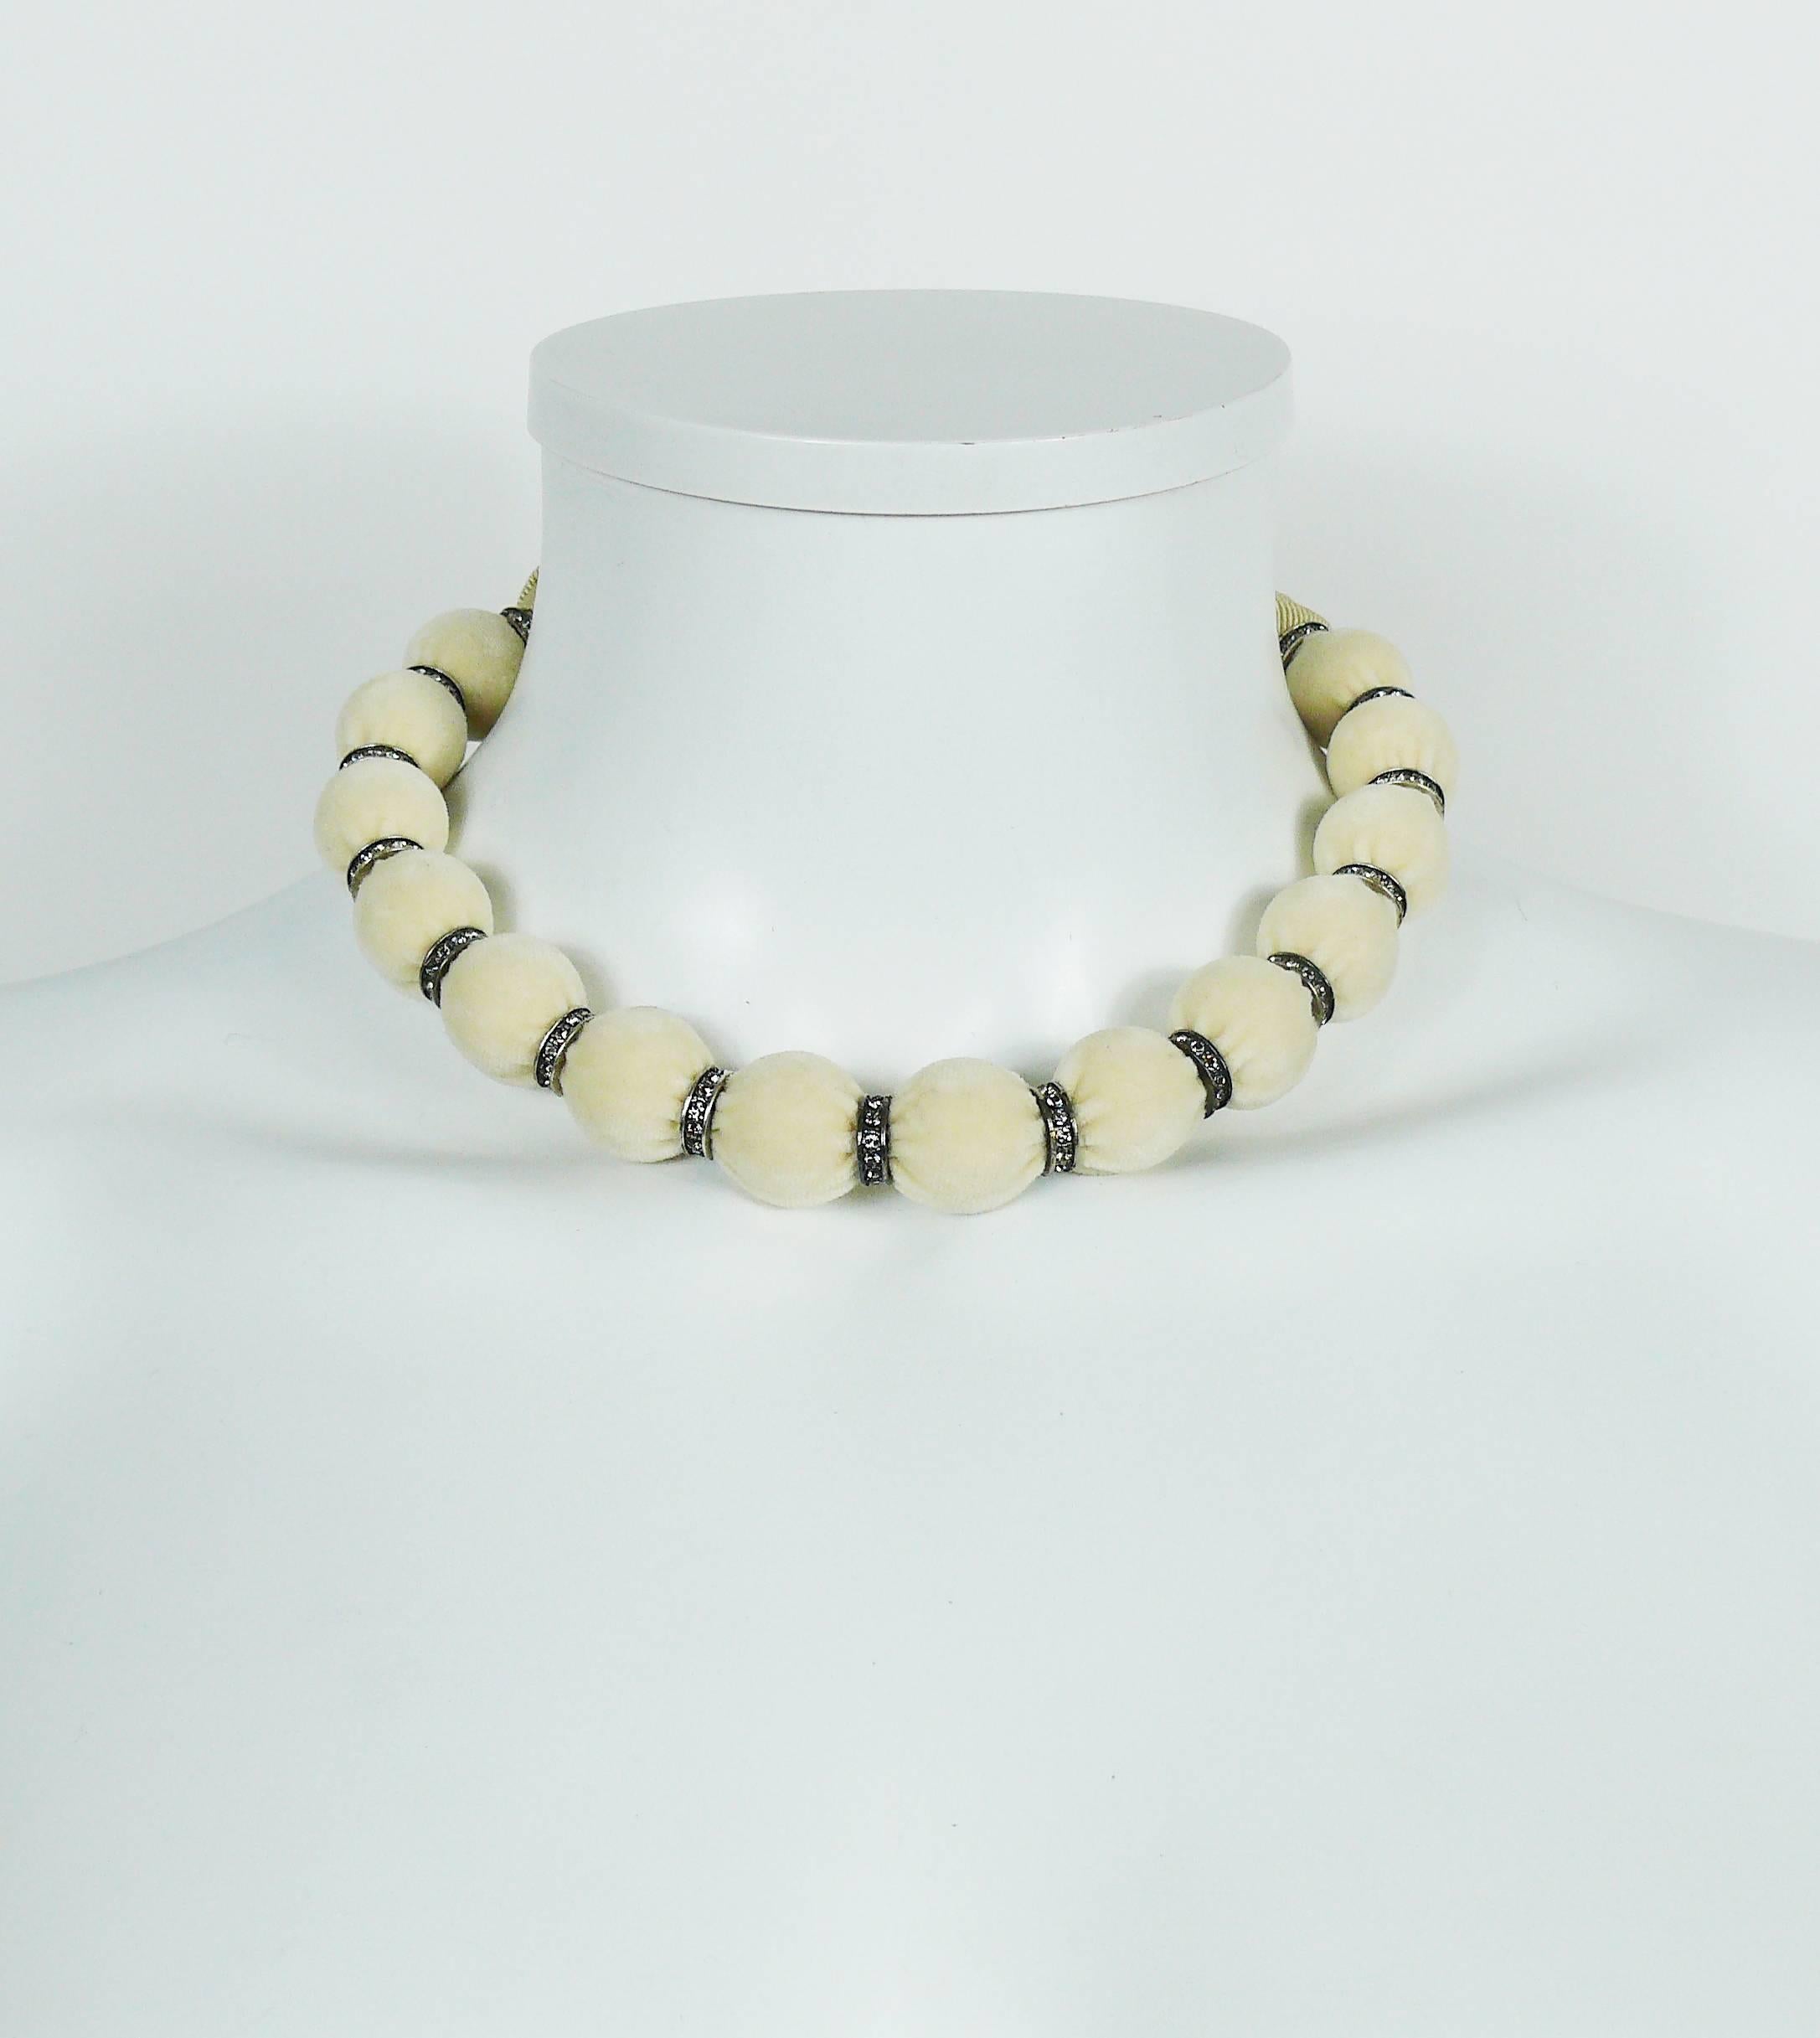 LANVIN choker necklace featuring beige velvet balls alterning with clear crystal rondelles.

Grosgrain ribbon.
Tie closure

Marked  LANVIN Paris Made in France.

Indicative measurements : total max. length approx. 107 cm (42.13 inches).

JEWELRY